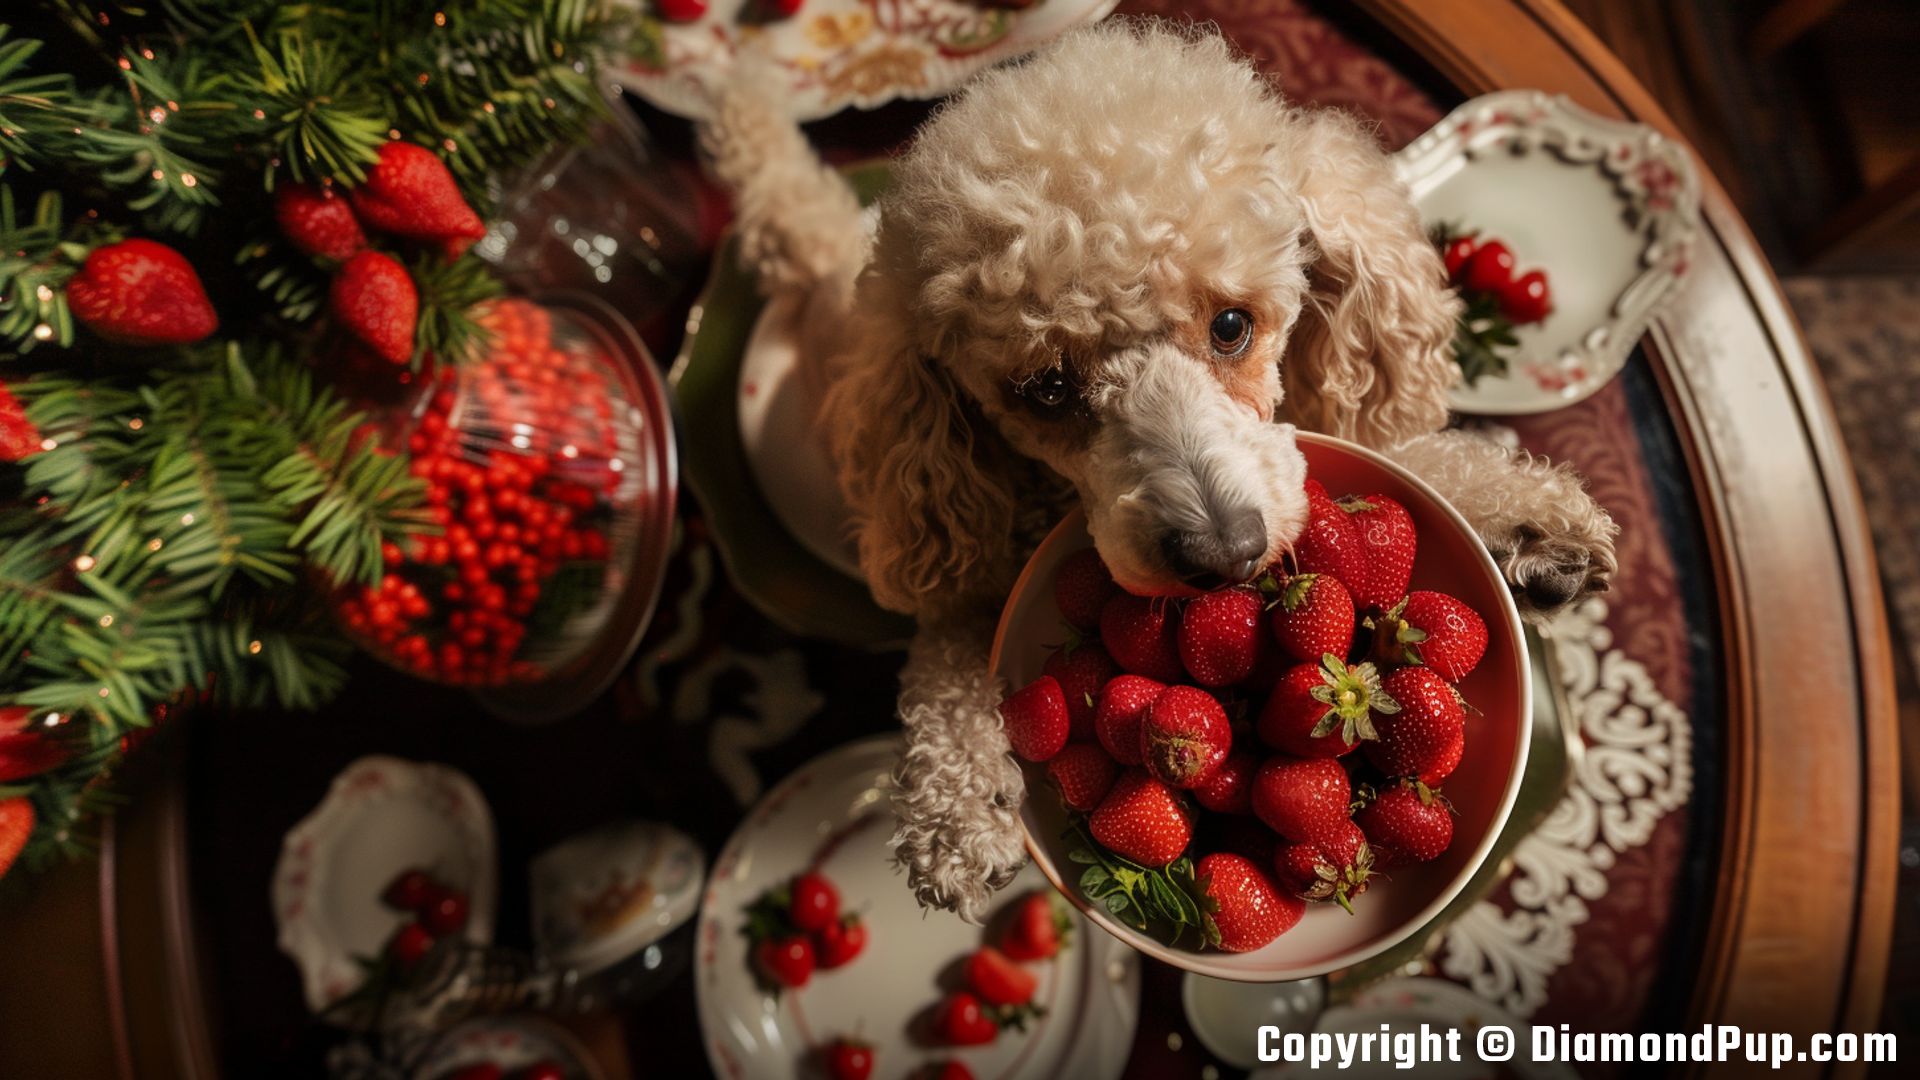 Photograph of Poodle Snacking on Strawberries